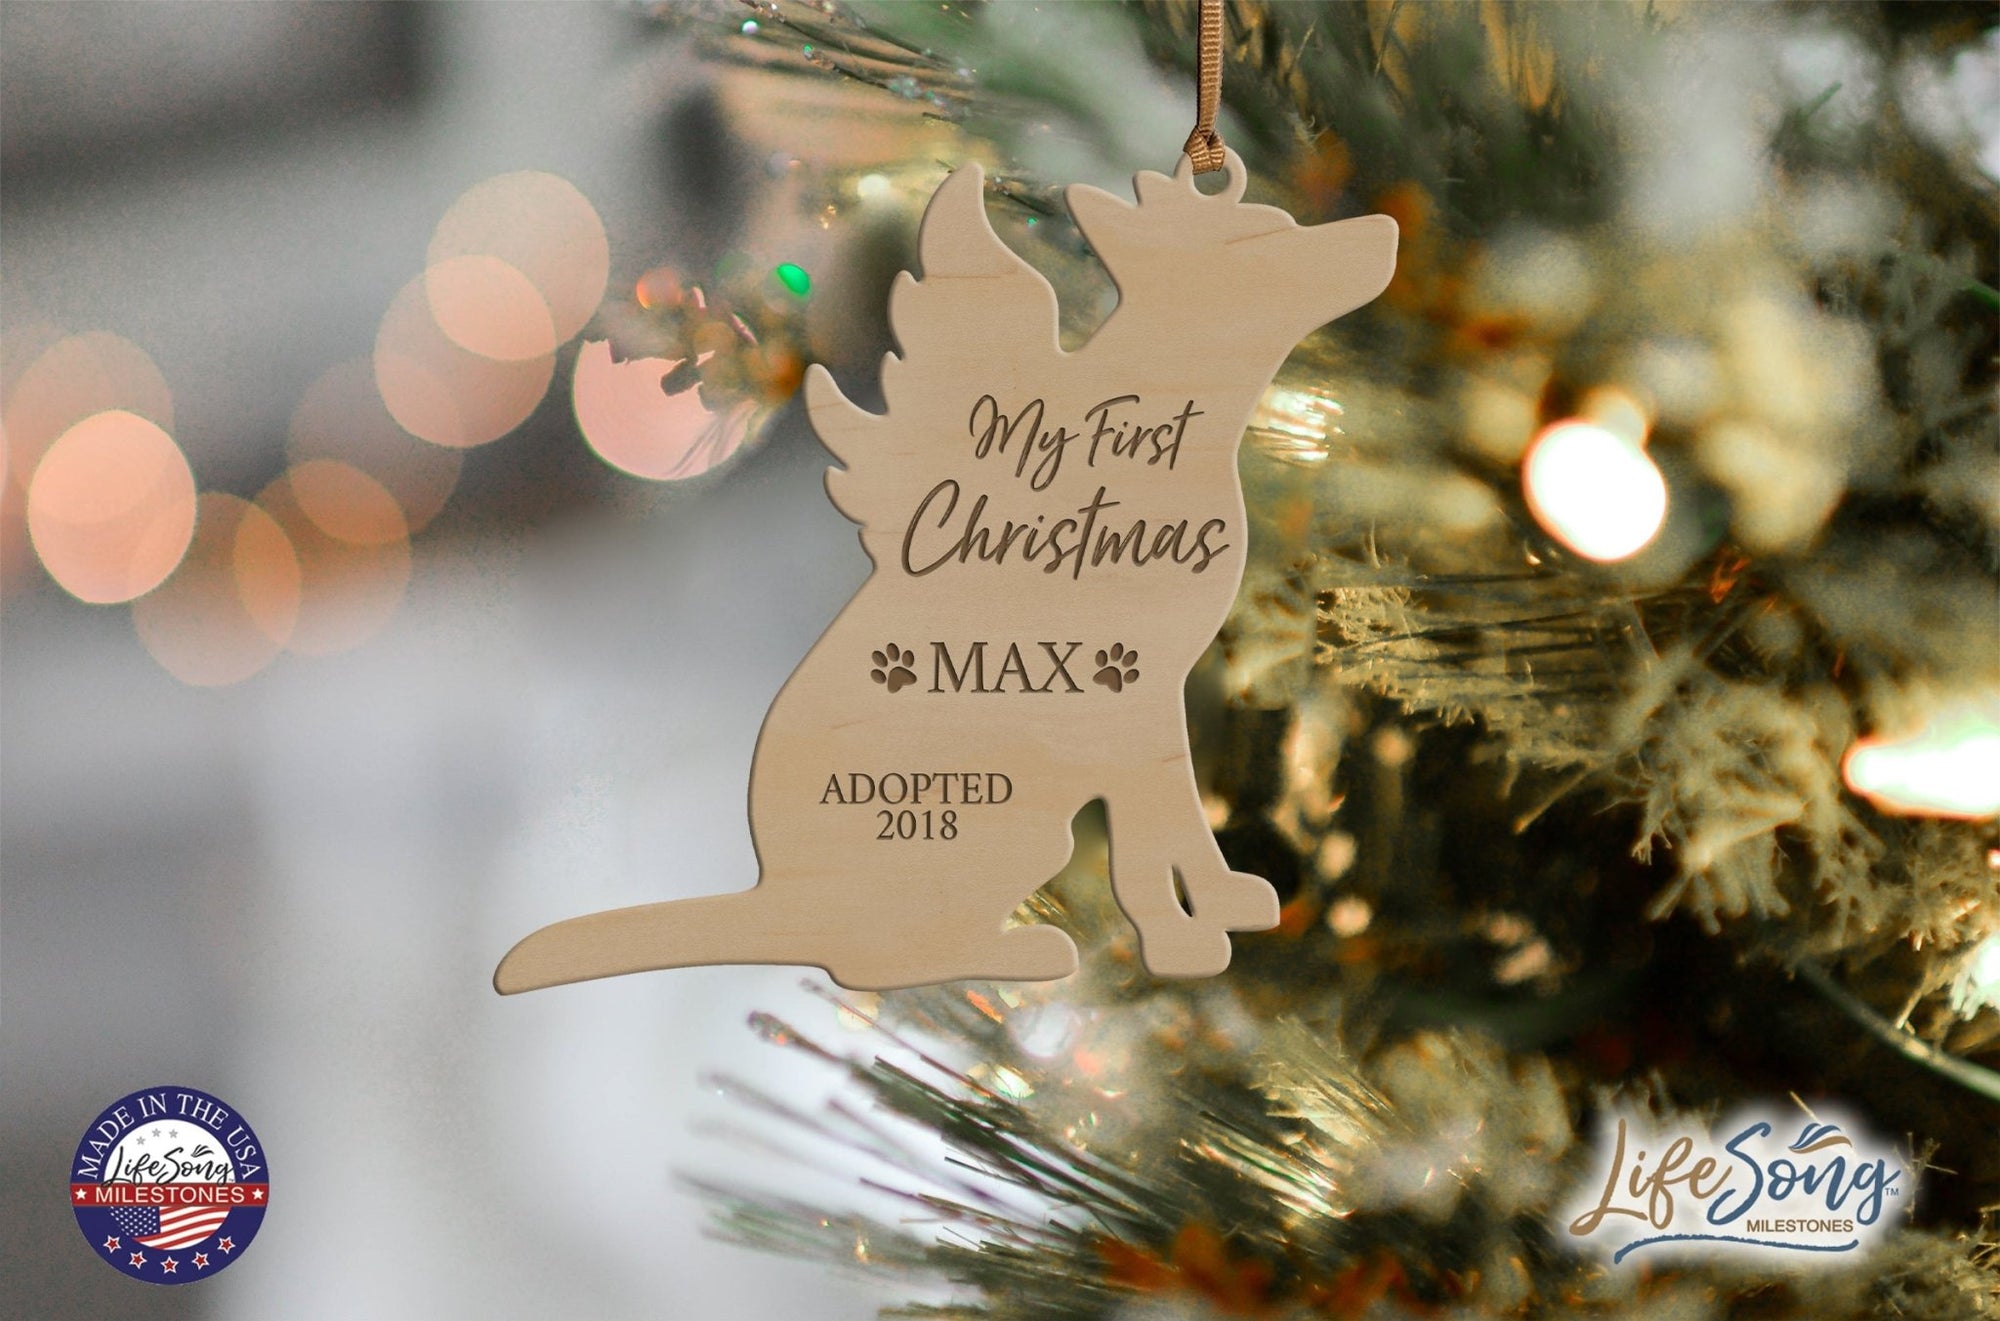 Personalized Engraved Christmas Dog Ornament 4.9375” x 5.375” x 0.125” - My first Christmas (PAWS) - LifeSong Milestones